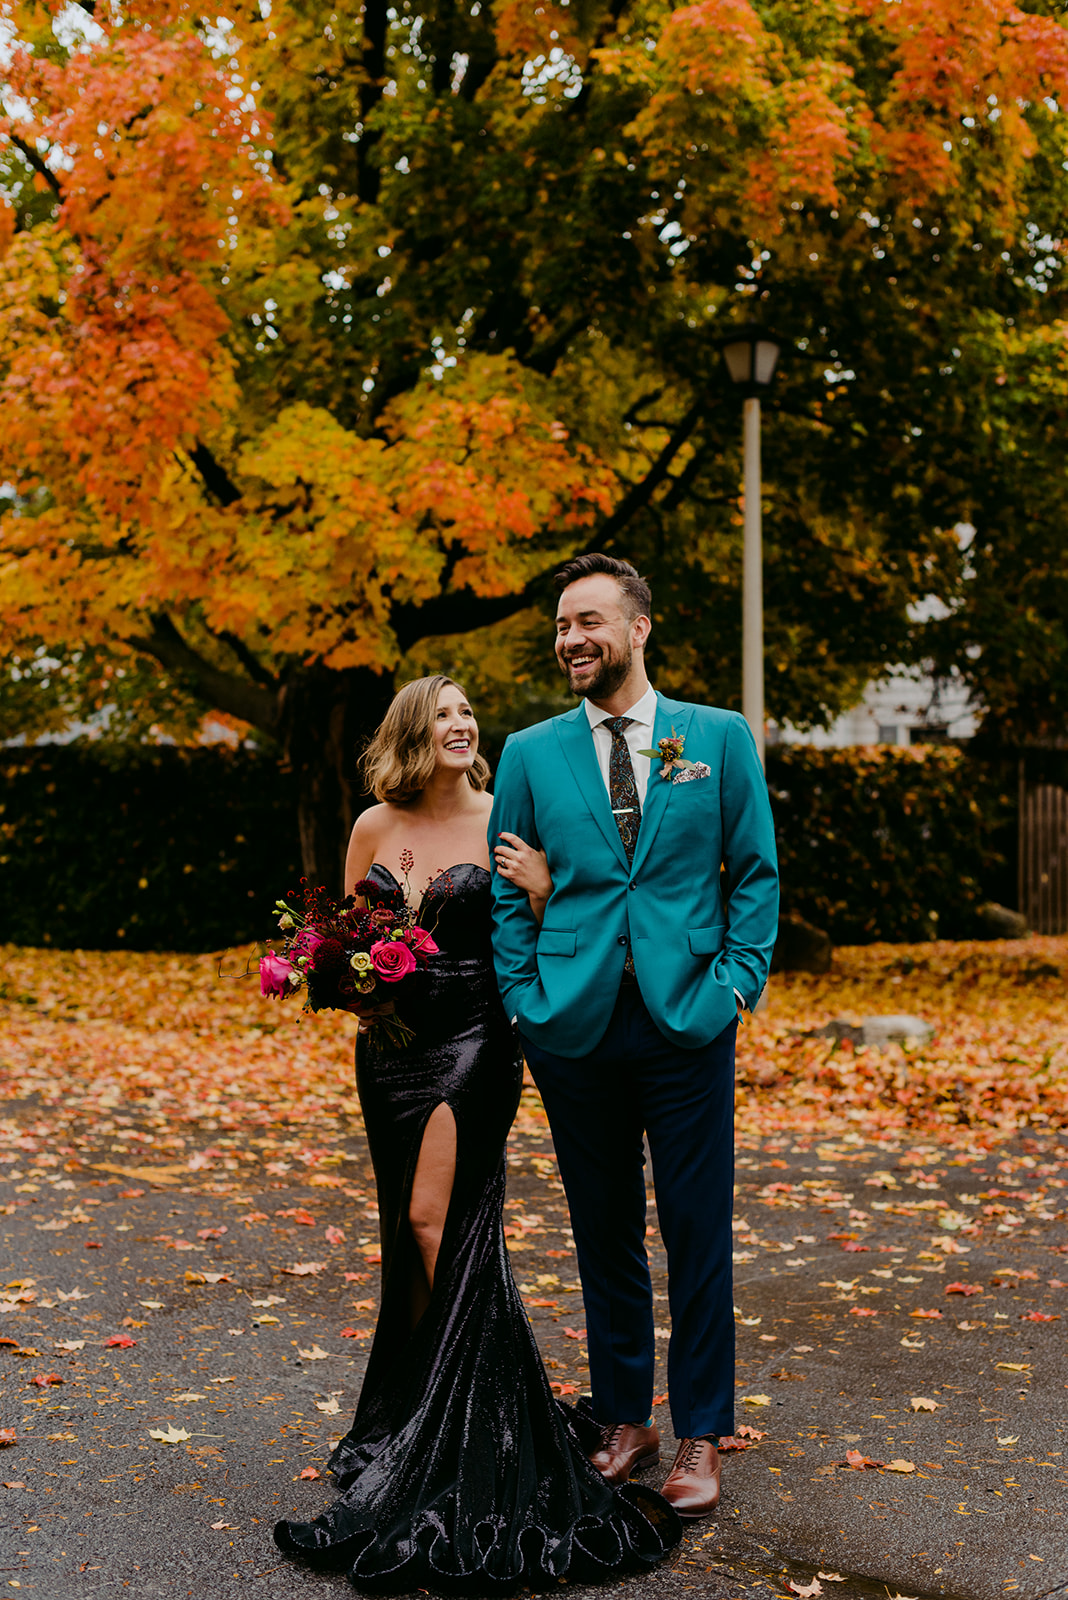 bride in black sequin dress standing with groom outdoors by fall coloured tree